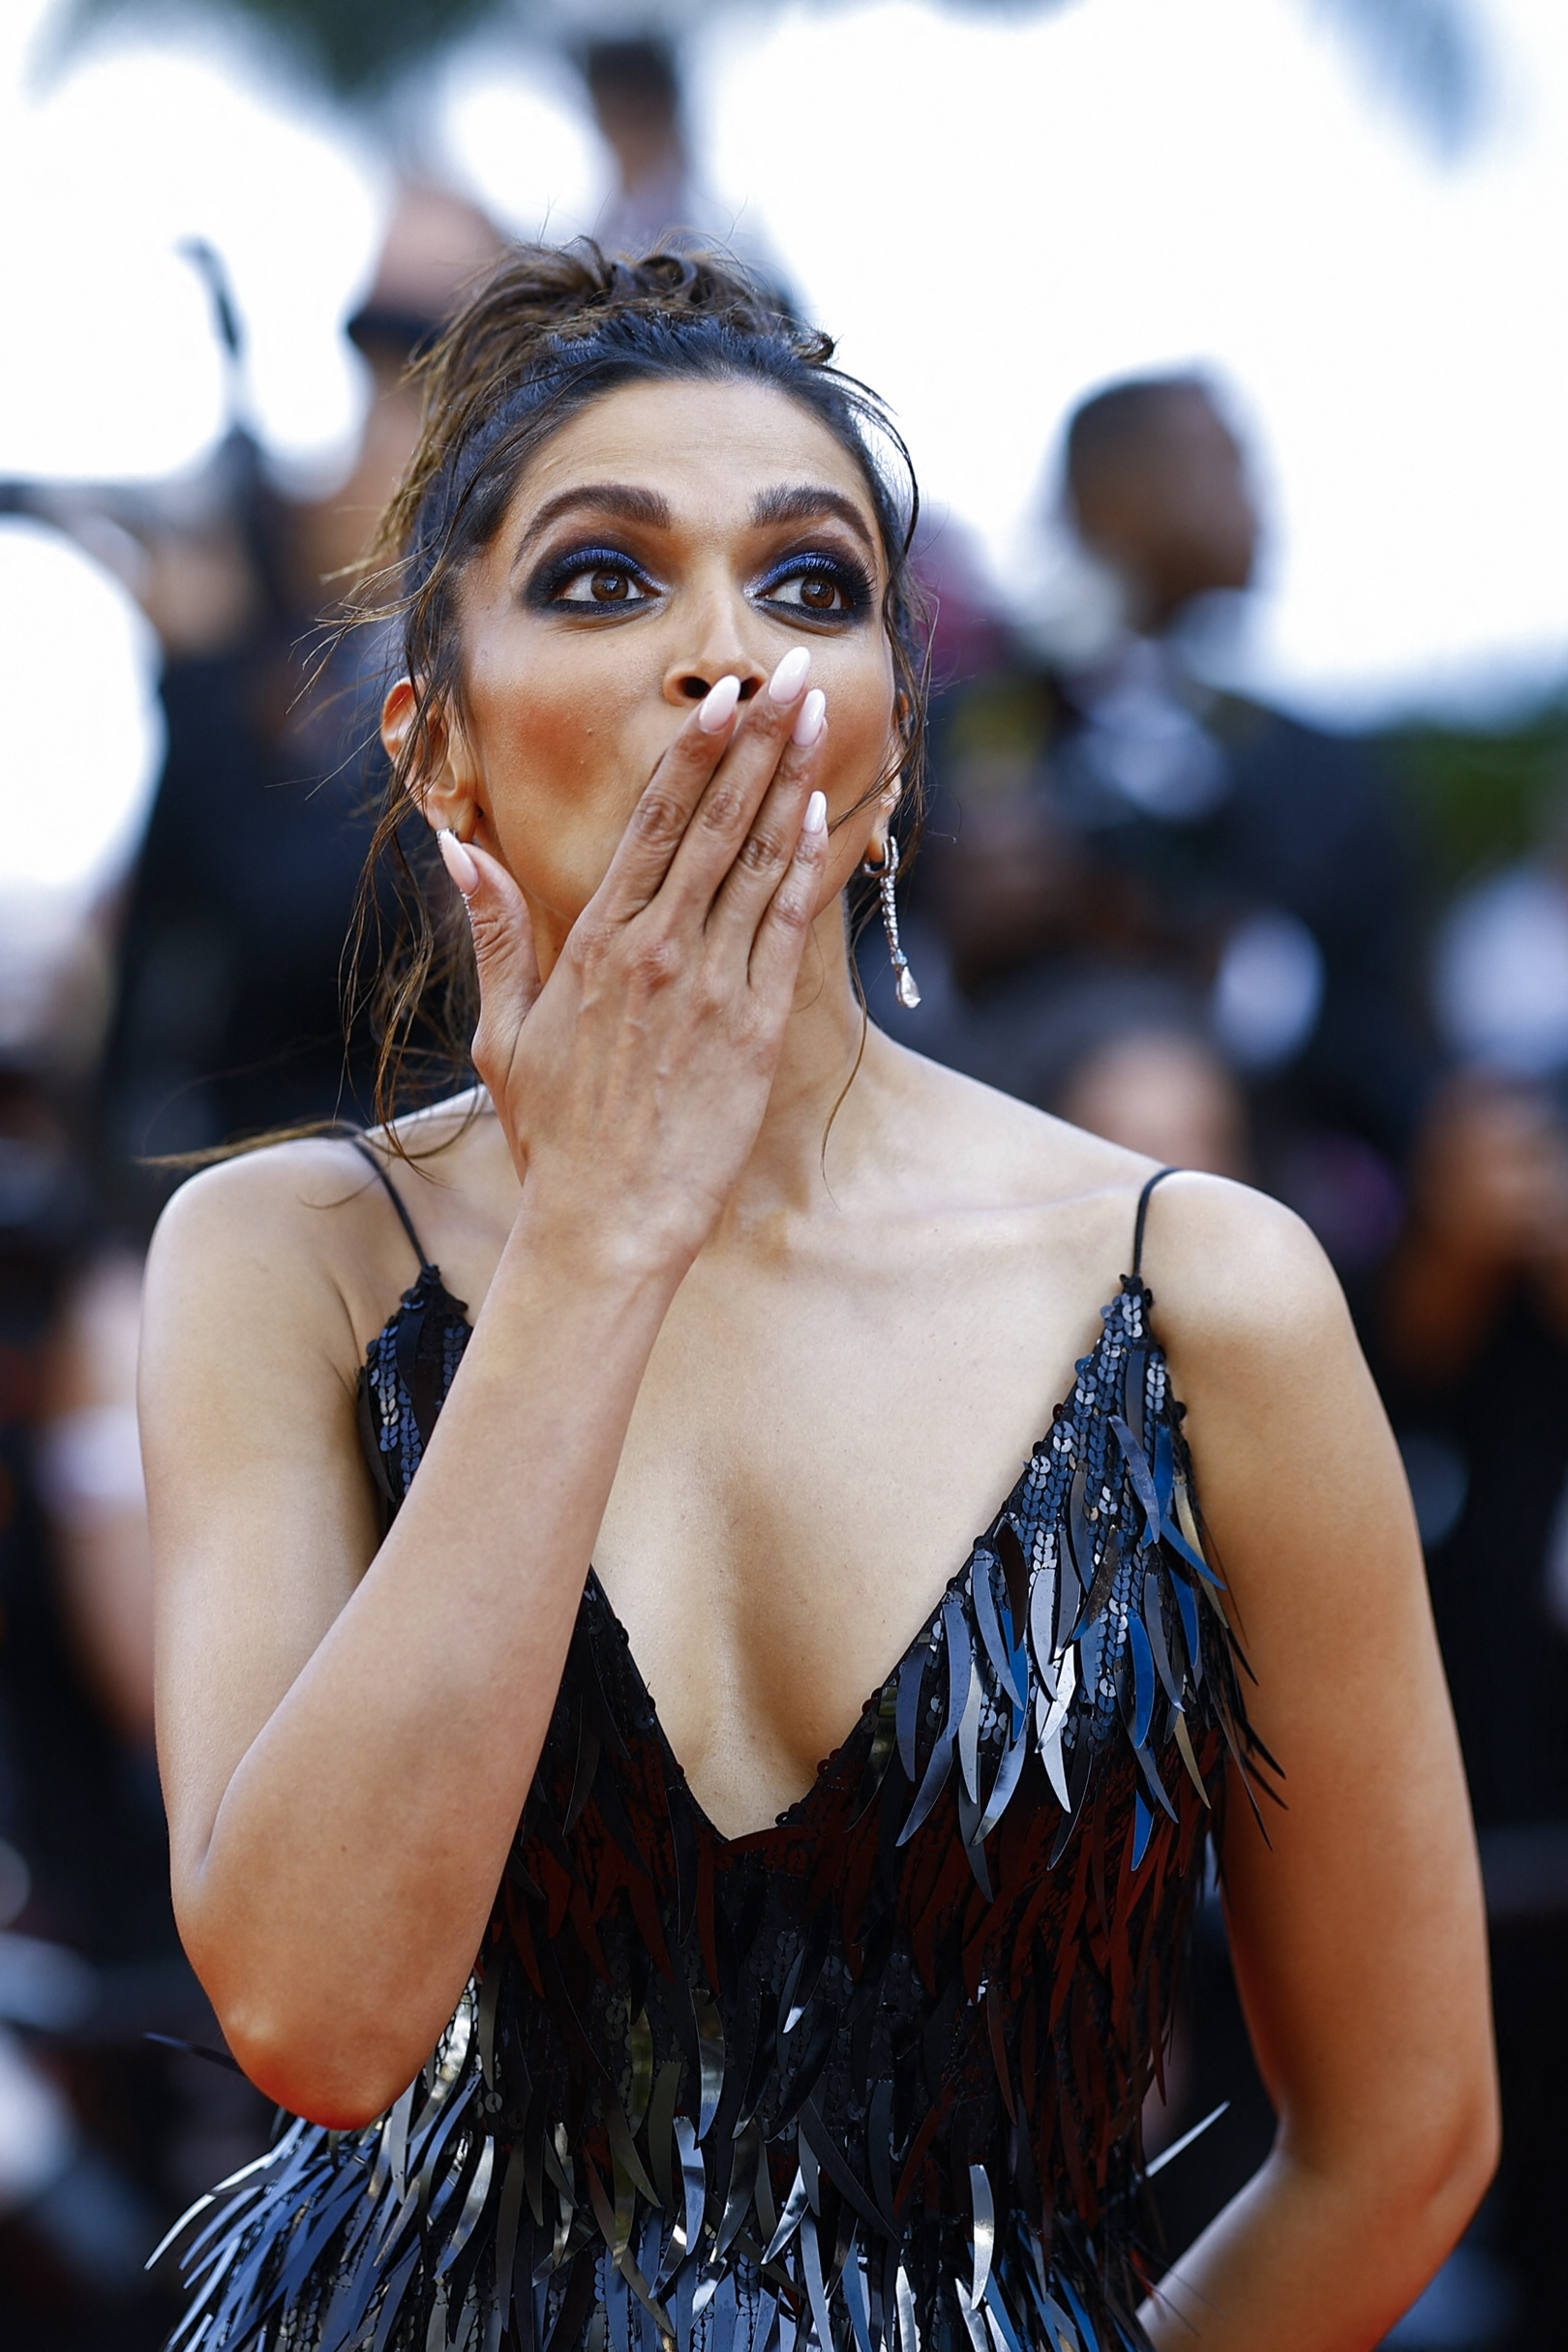 Deepika Padukone Xxnx - Deepika Padukone Blows Kiss in Super Hot Embellished Gown on Cannes Red  Carpet; See Pics